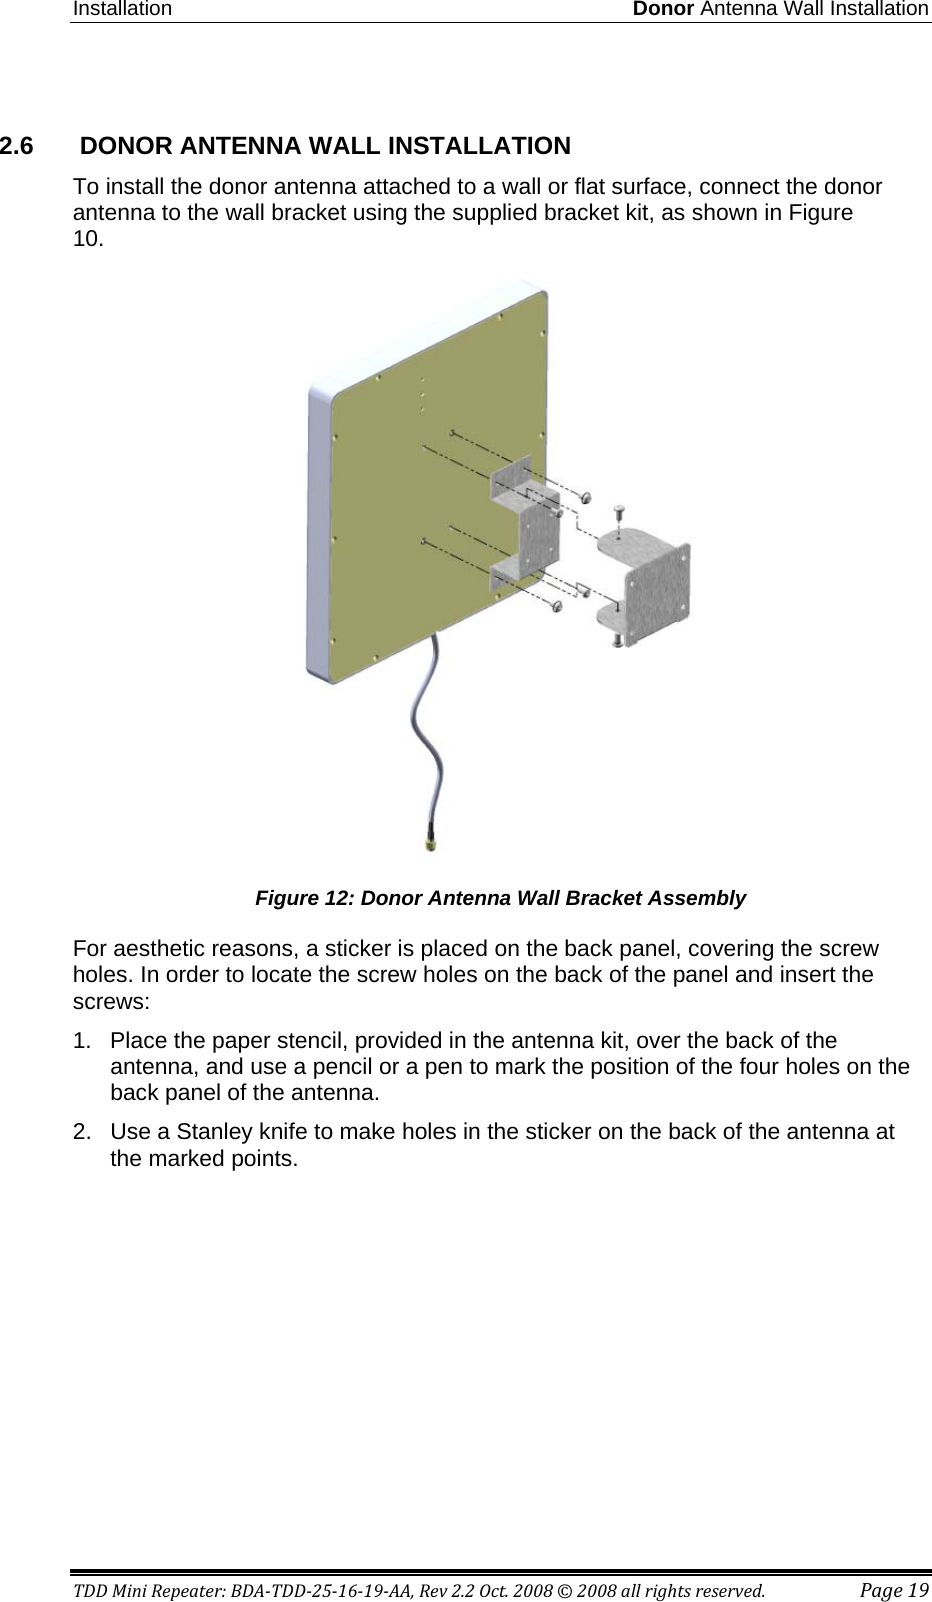 Installation Donor Antenna Wall Installation TDD Mini Repeater: BDA-TDD-25-16-19-AA, Rev 2.2 Oct. 2008 © 2008 all rights reserved. Page 19  2.6   DONOR ANTENNA WALL INSTALLATION  To install the donor antenna attached to a wall or flat surface, connect the donor antenna to the wall bracket using the supplied bracket kit, as shown in Figure 10.  Figure 12: Donor Antenna Wall Bracket Assembly For aesthetic reasons, a sticker is placed on the back panel, covering the screw holes. In order to locate the screw holes on the back of the panel and insert the screws: 1.  Place the paper stencil, provided in the antenna kit, over the back of the antenna, and use a pencil or a pen to mark the position of the four holes on the back panel of the antenna.  2.  Use a Stanley knife to make holes in the sticker on the back of the antenna at the marked points. 